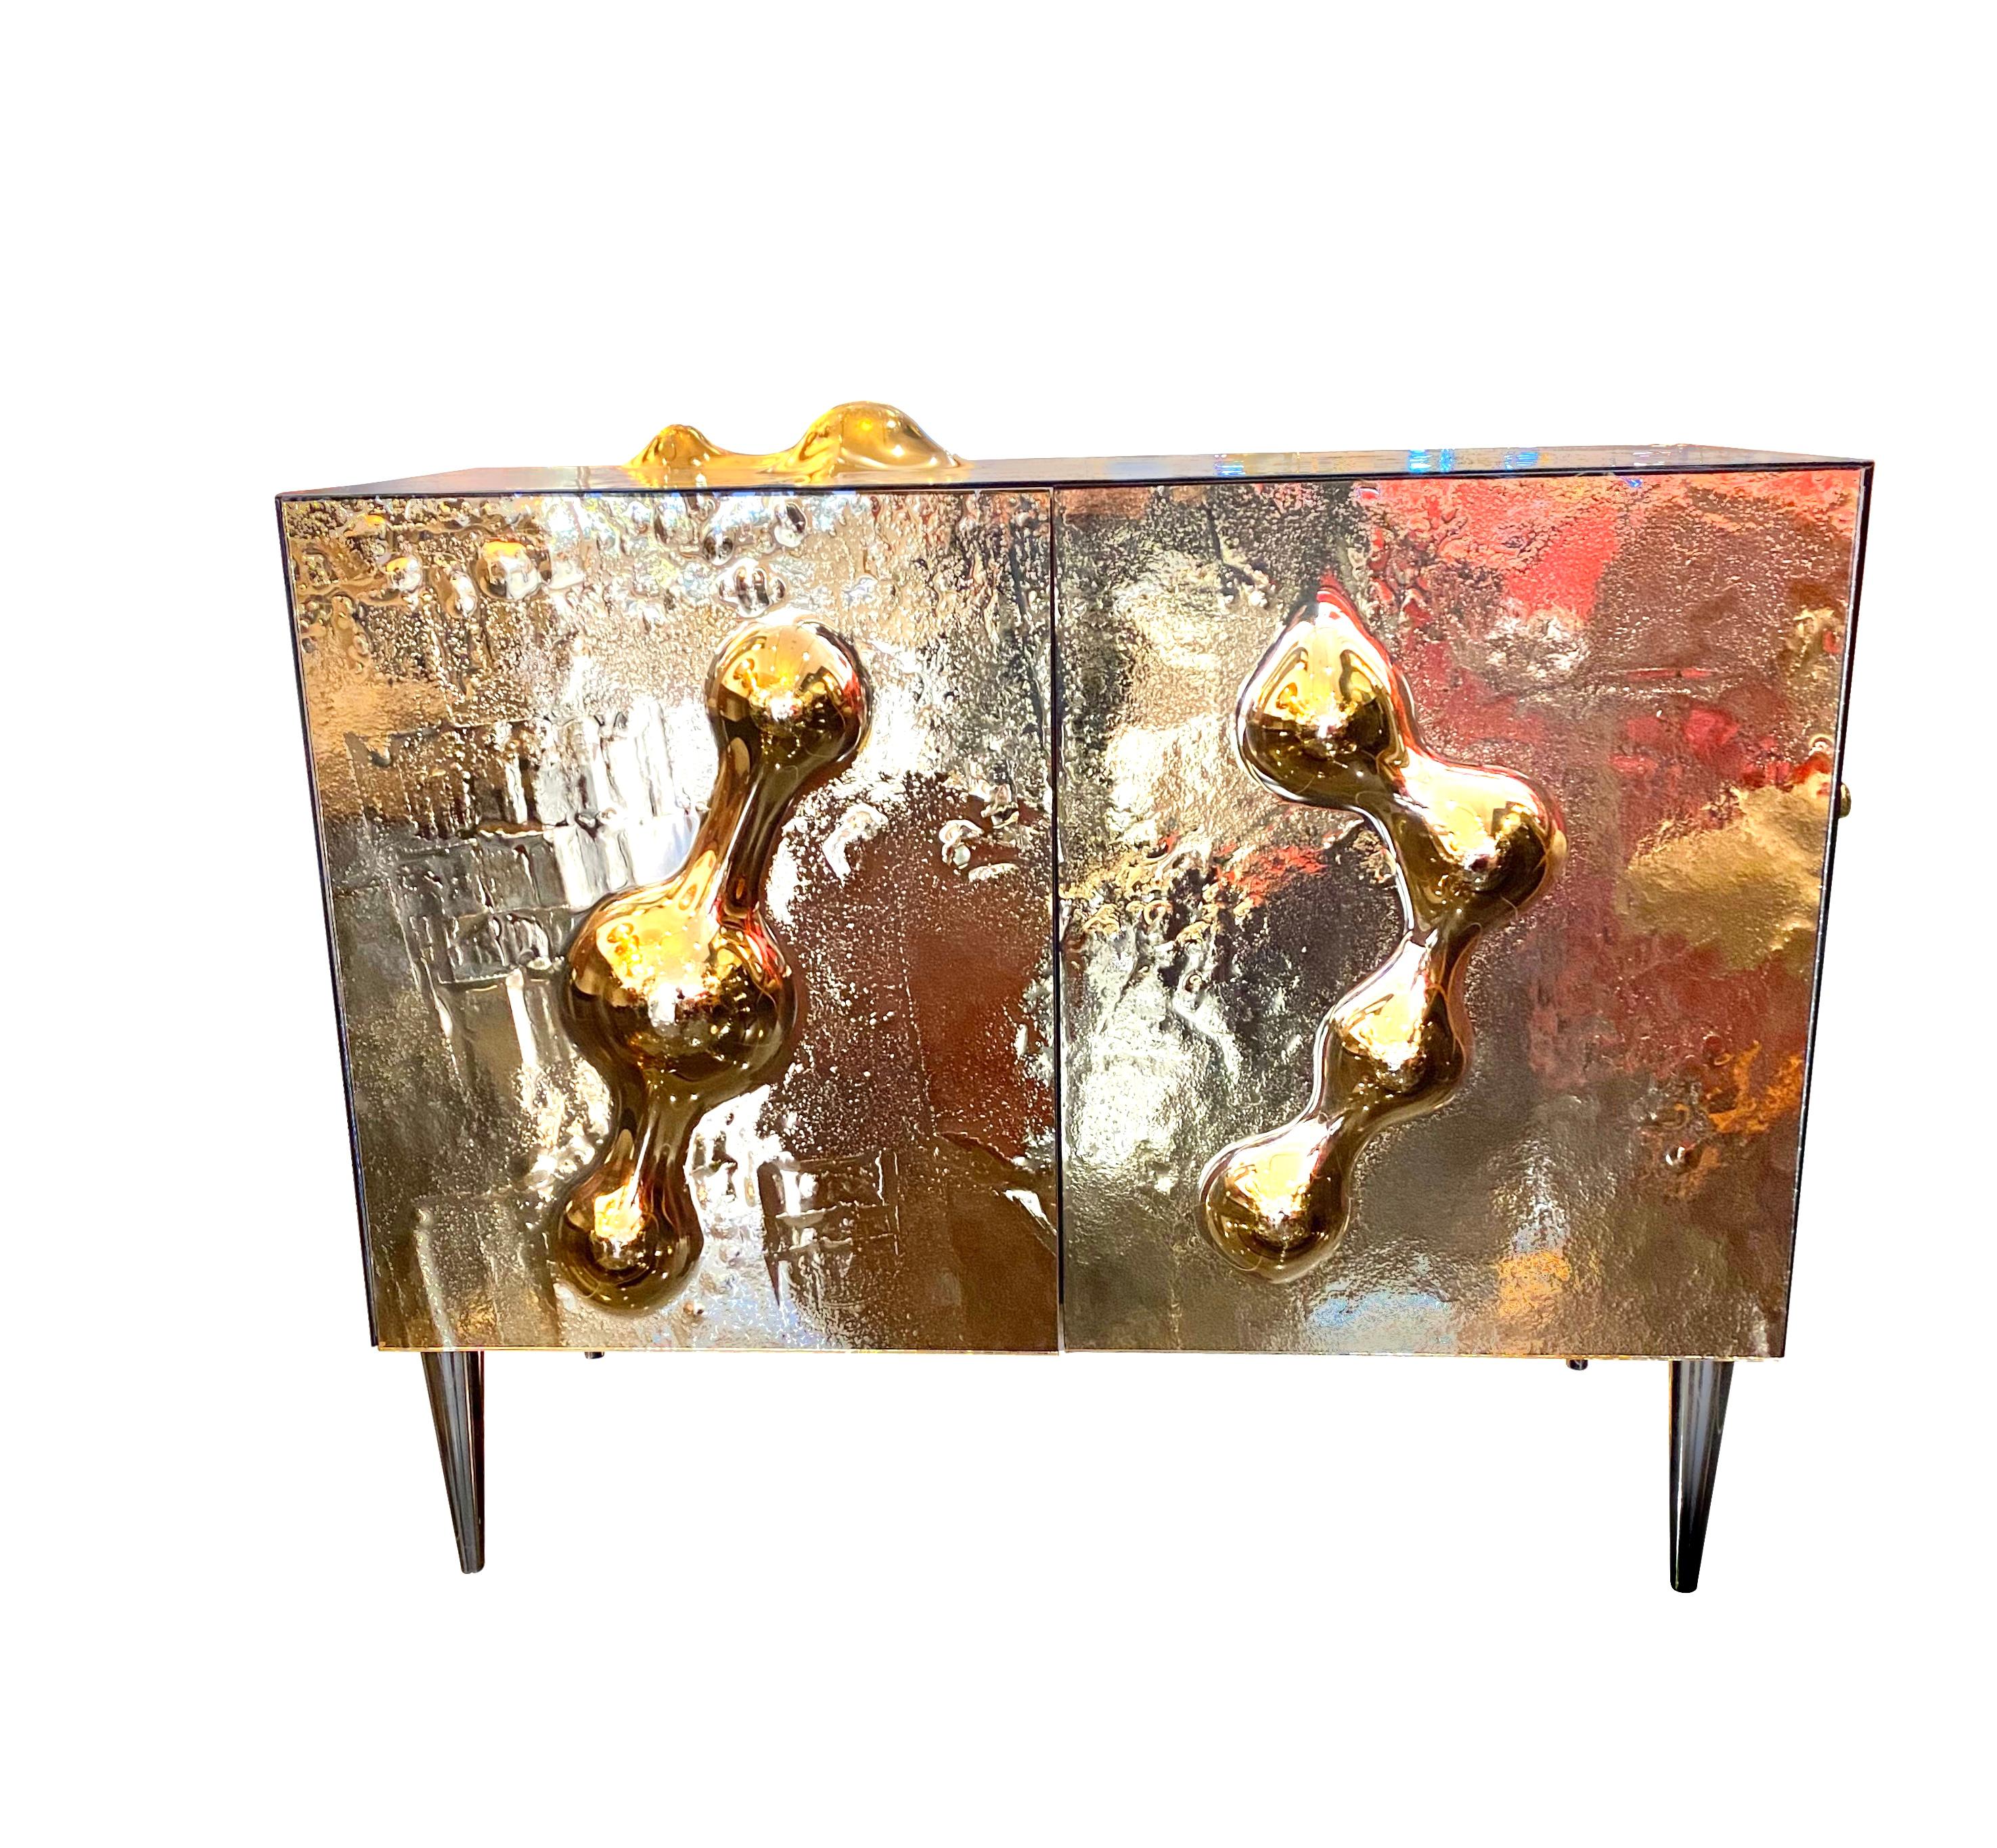 An extraordinary all glass art cabinet designed uniquely for Studio RKade by Atelier Vetro Effetto.Milan

The cabinet is completely handcrafted with a copper mirrored exterior depicting a Martian landscape with intricate detailing.

The cabinet